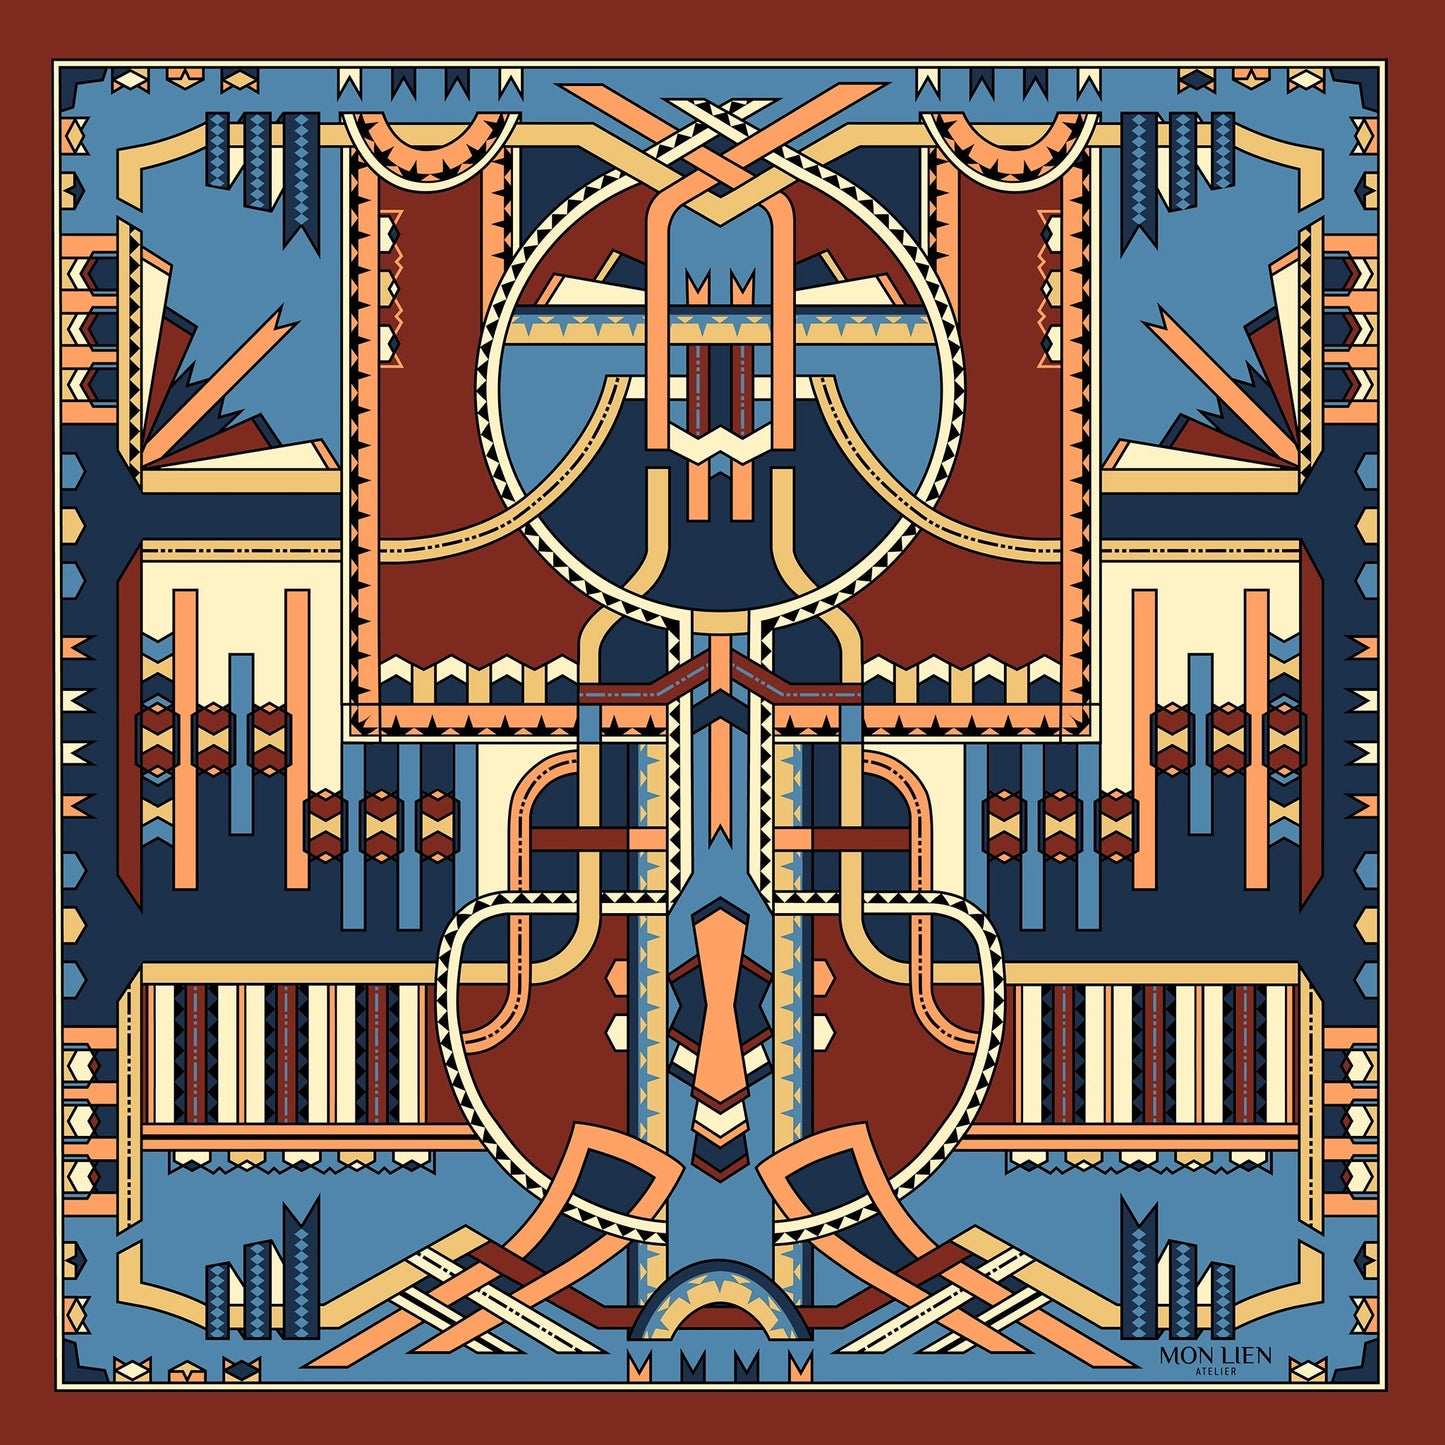 Silk pocket square | The dancing ribbons | blue and terracotta